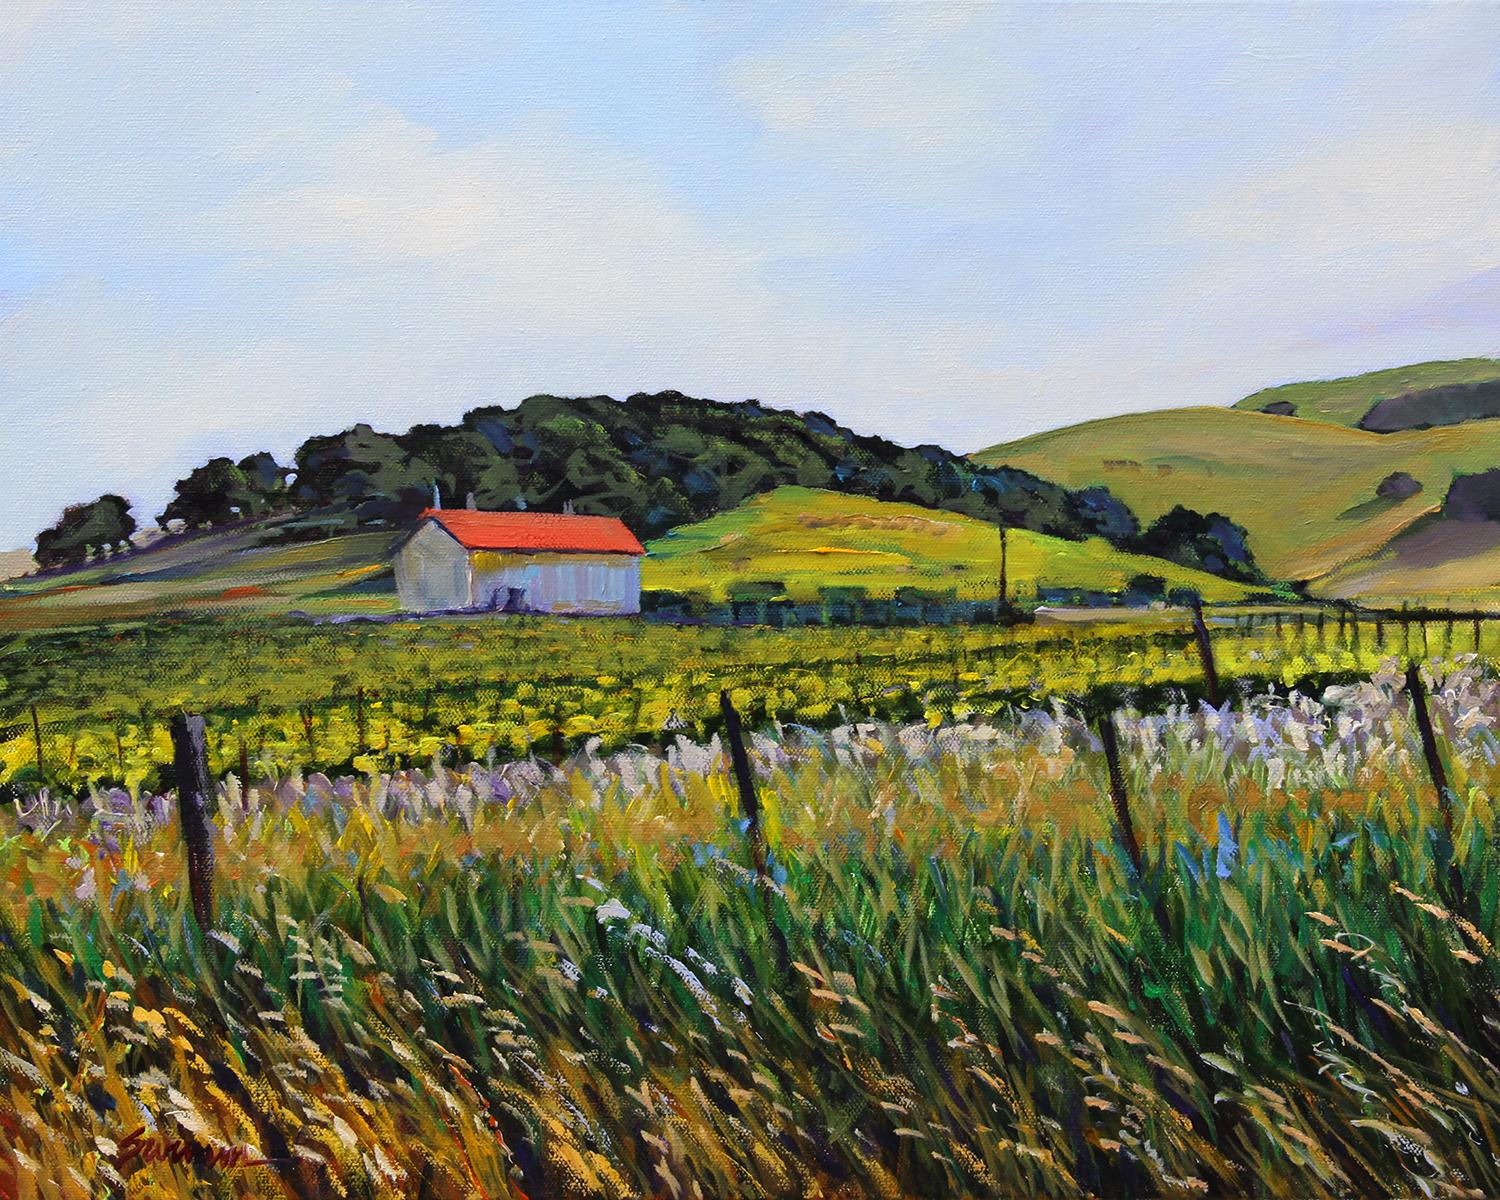 Tom Swimm Landscape Painting - "In The Vineyard" Colorful Fields Under Blue Skies